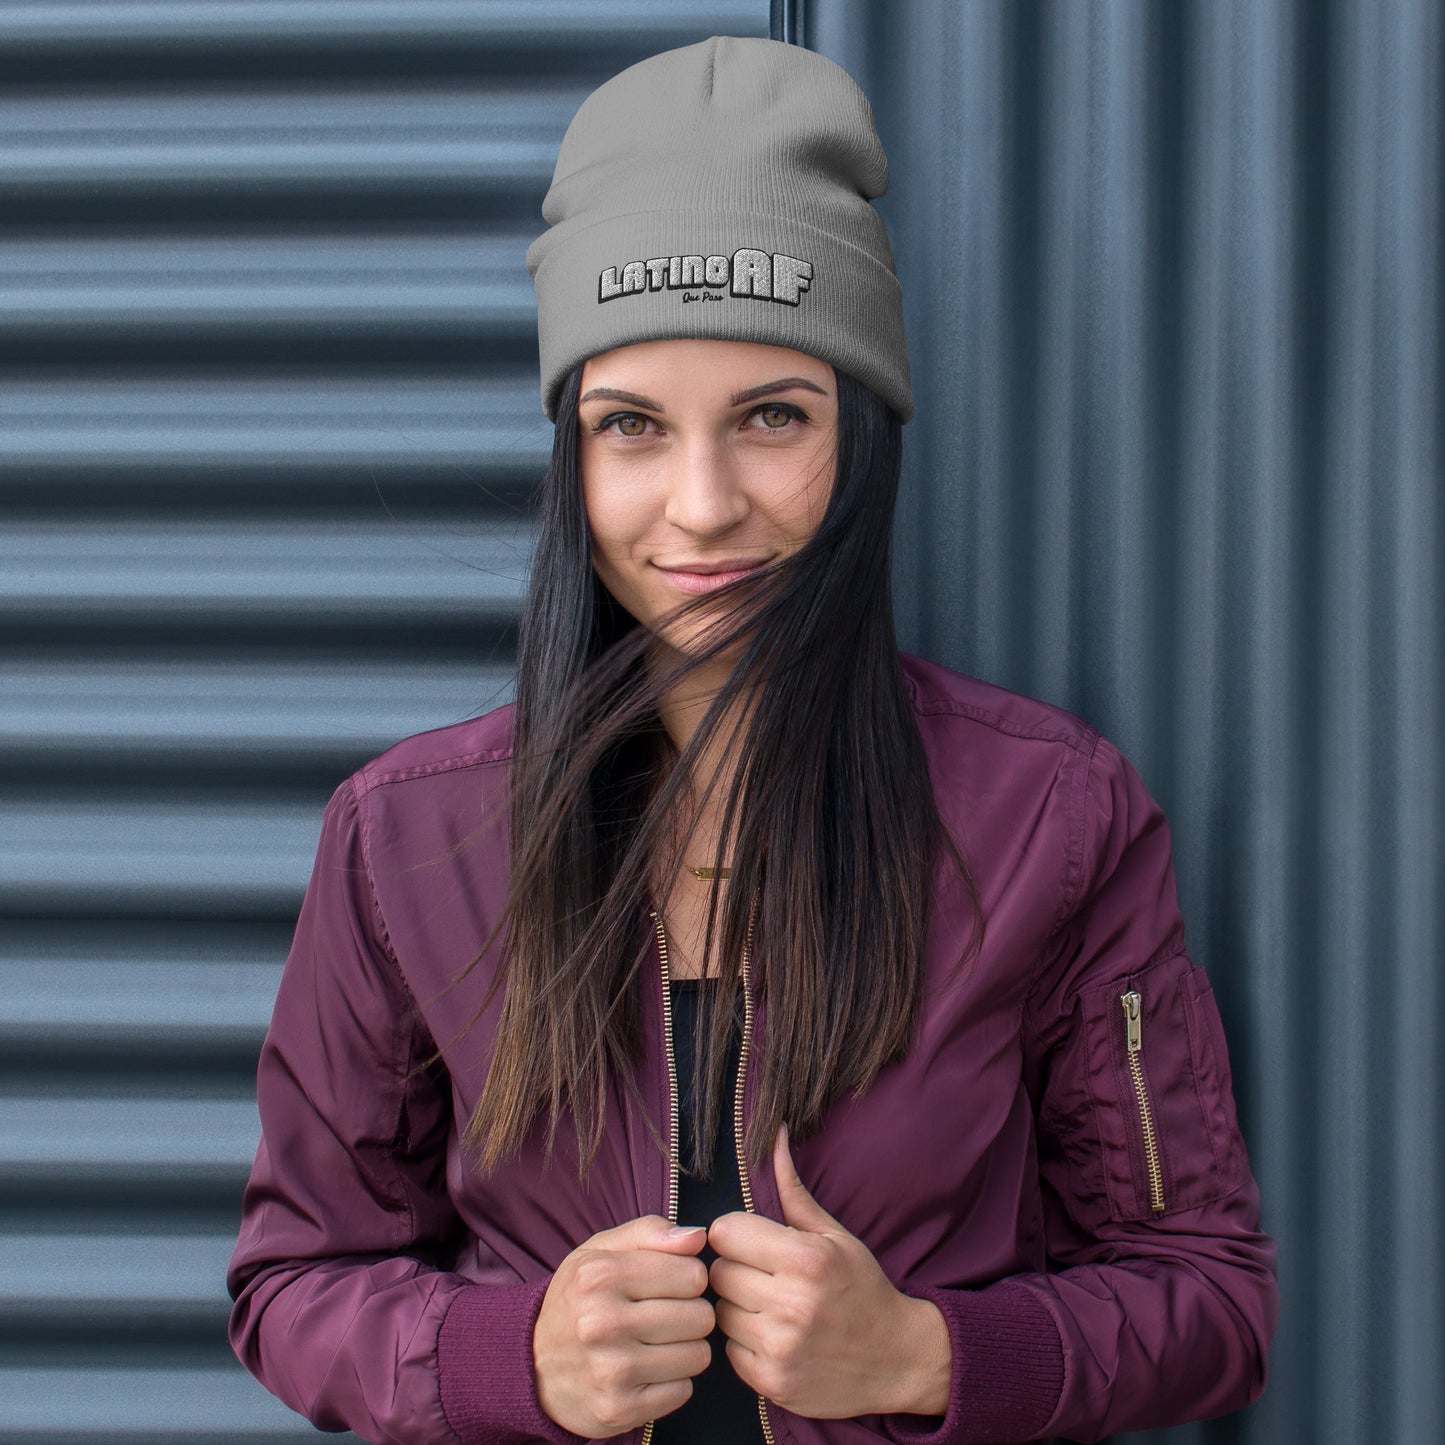 Latino AF Embroidered Beanie